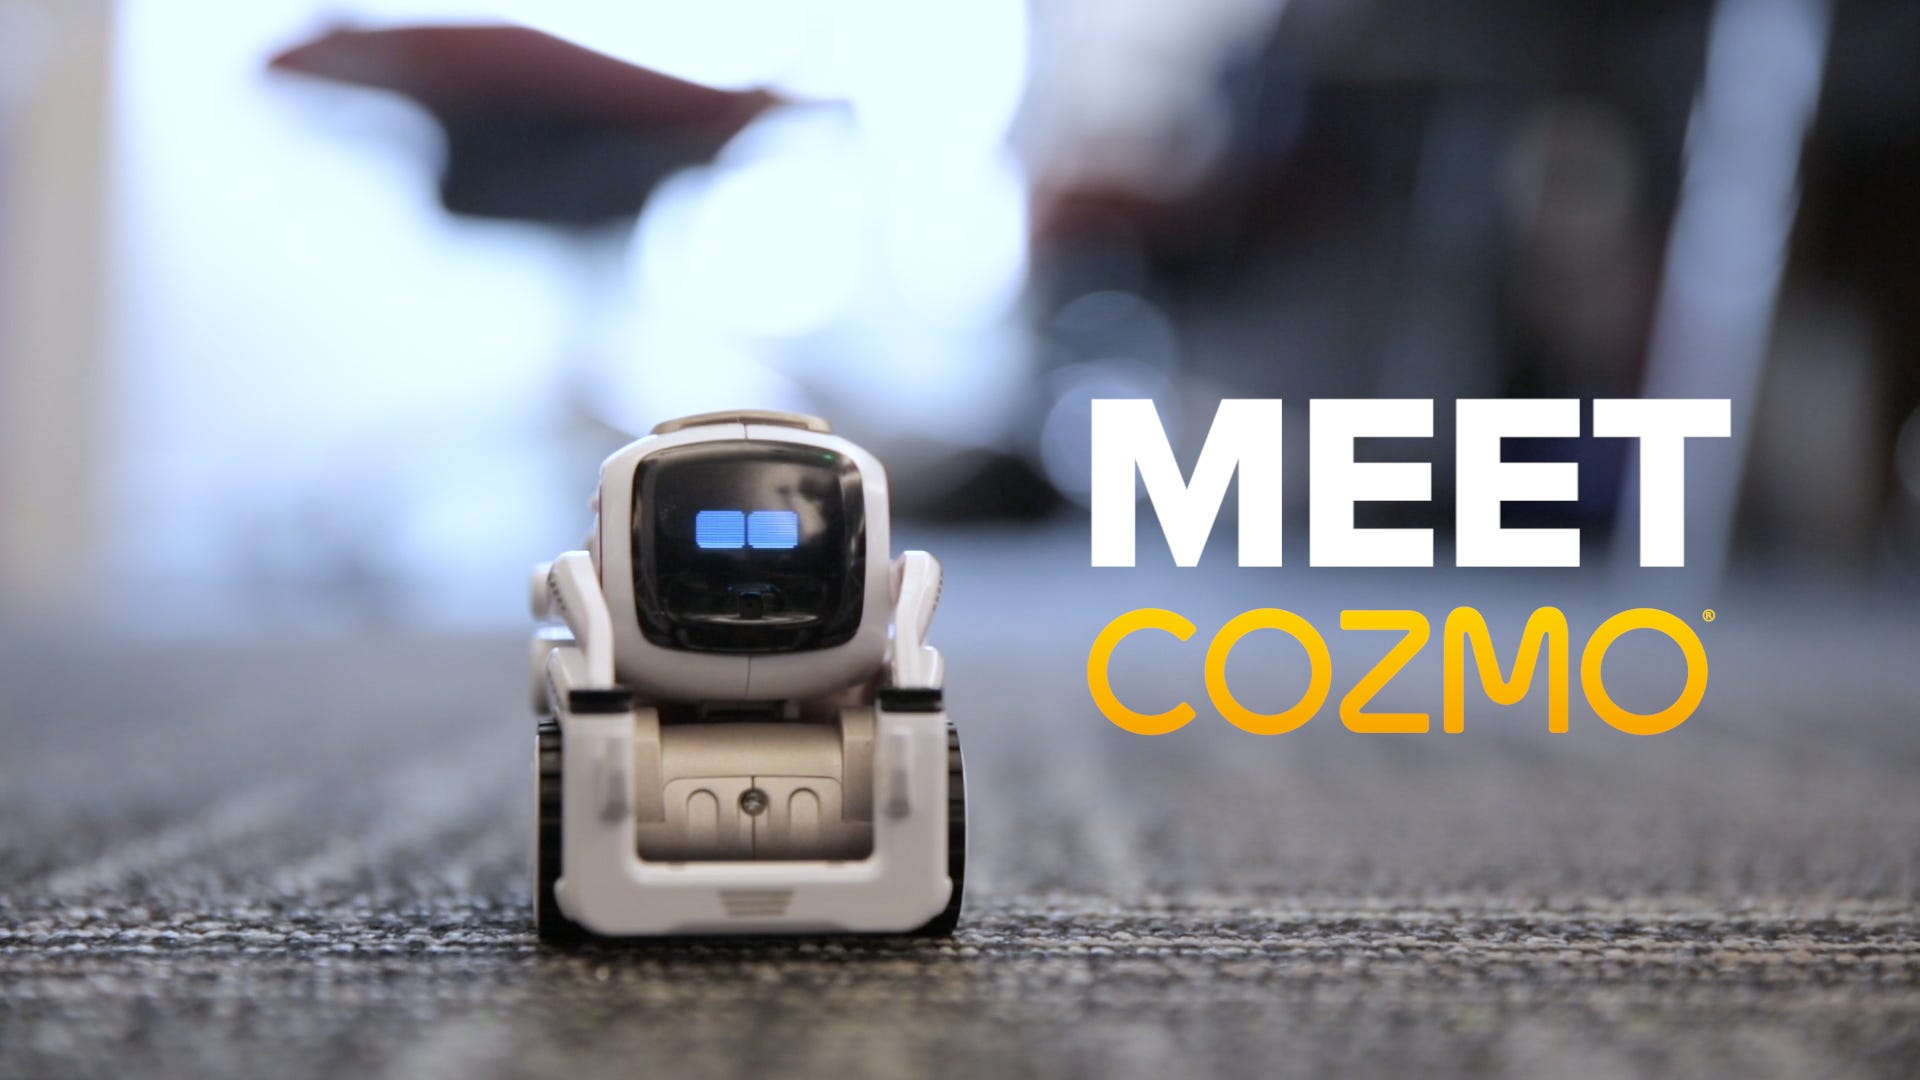 Meet Cozmo, the AI robot with emotions - Video - CNET